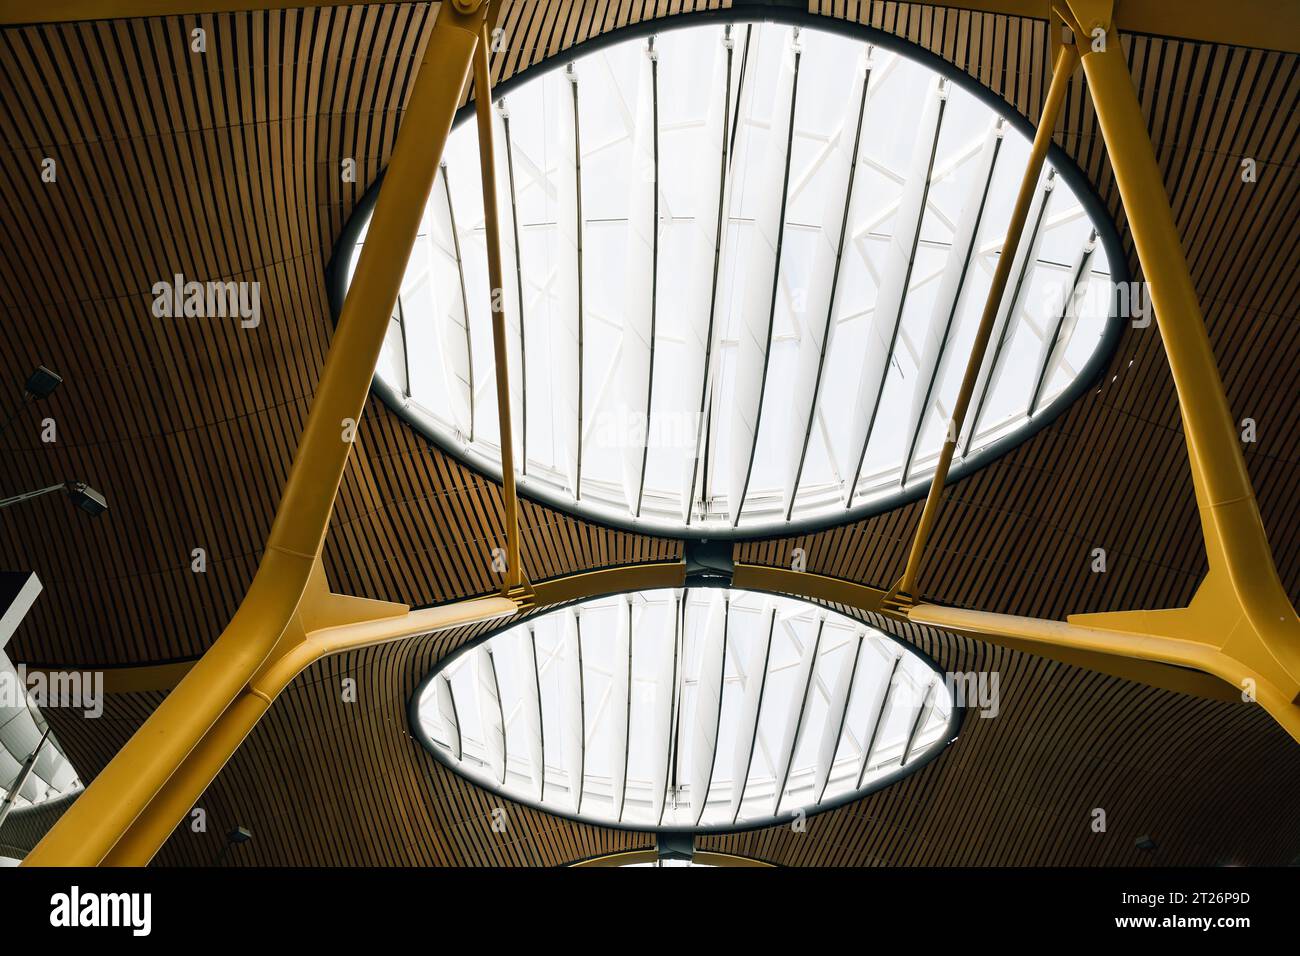 MADRID, SPAIN - August 24, 2023: Architectural detail of ceilings and skylights of Terminal T4 Adolfo Suarez Madrid Barajas Airport. Stock Photo